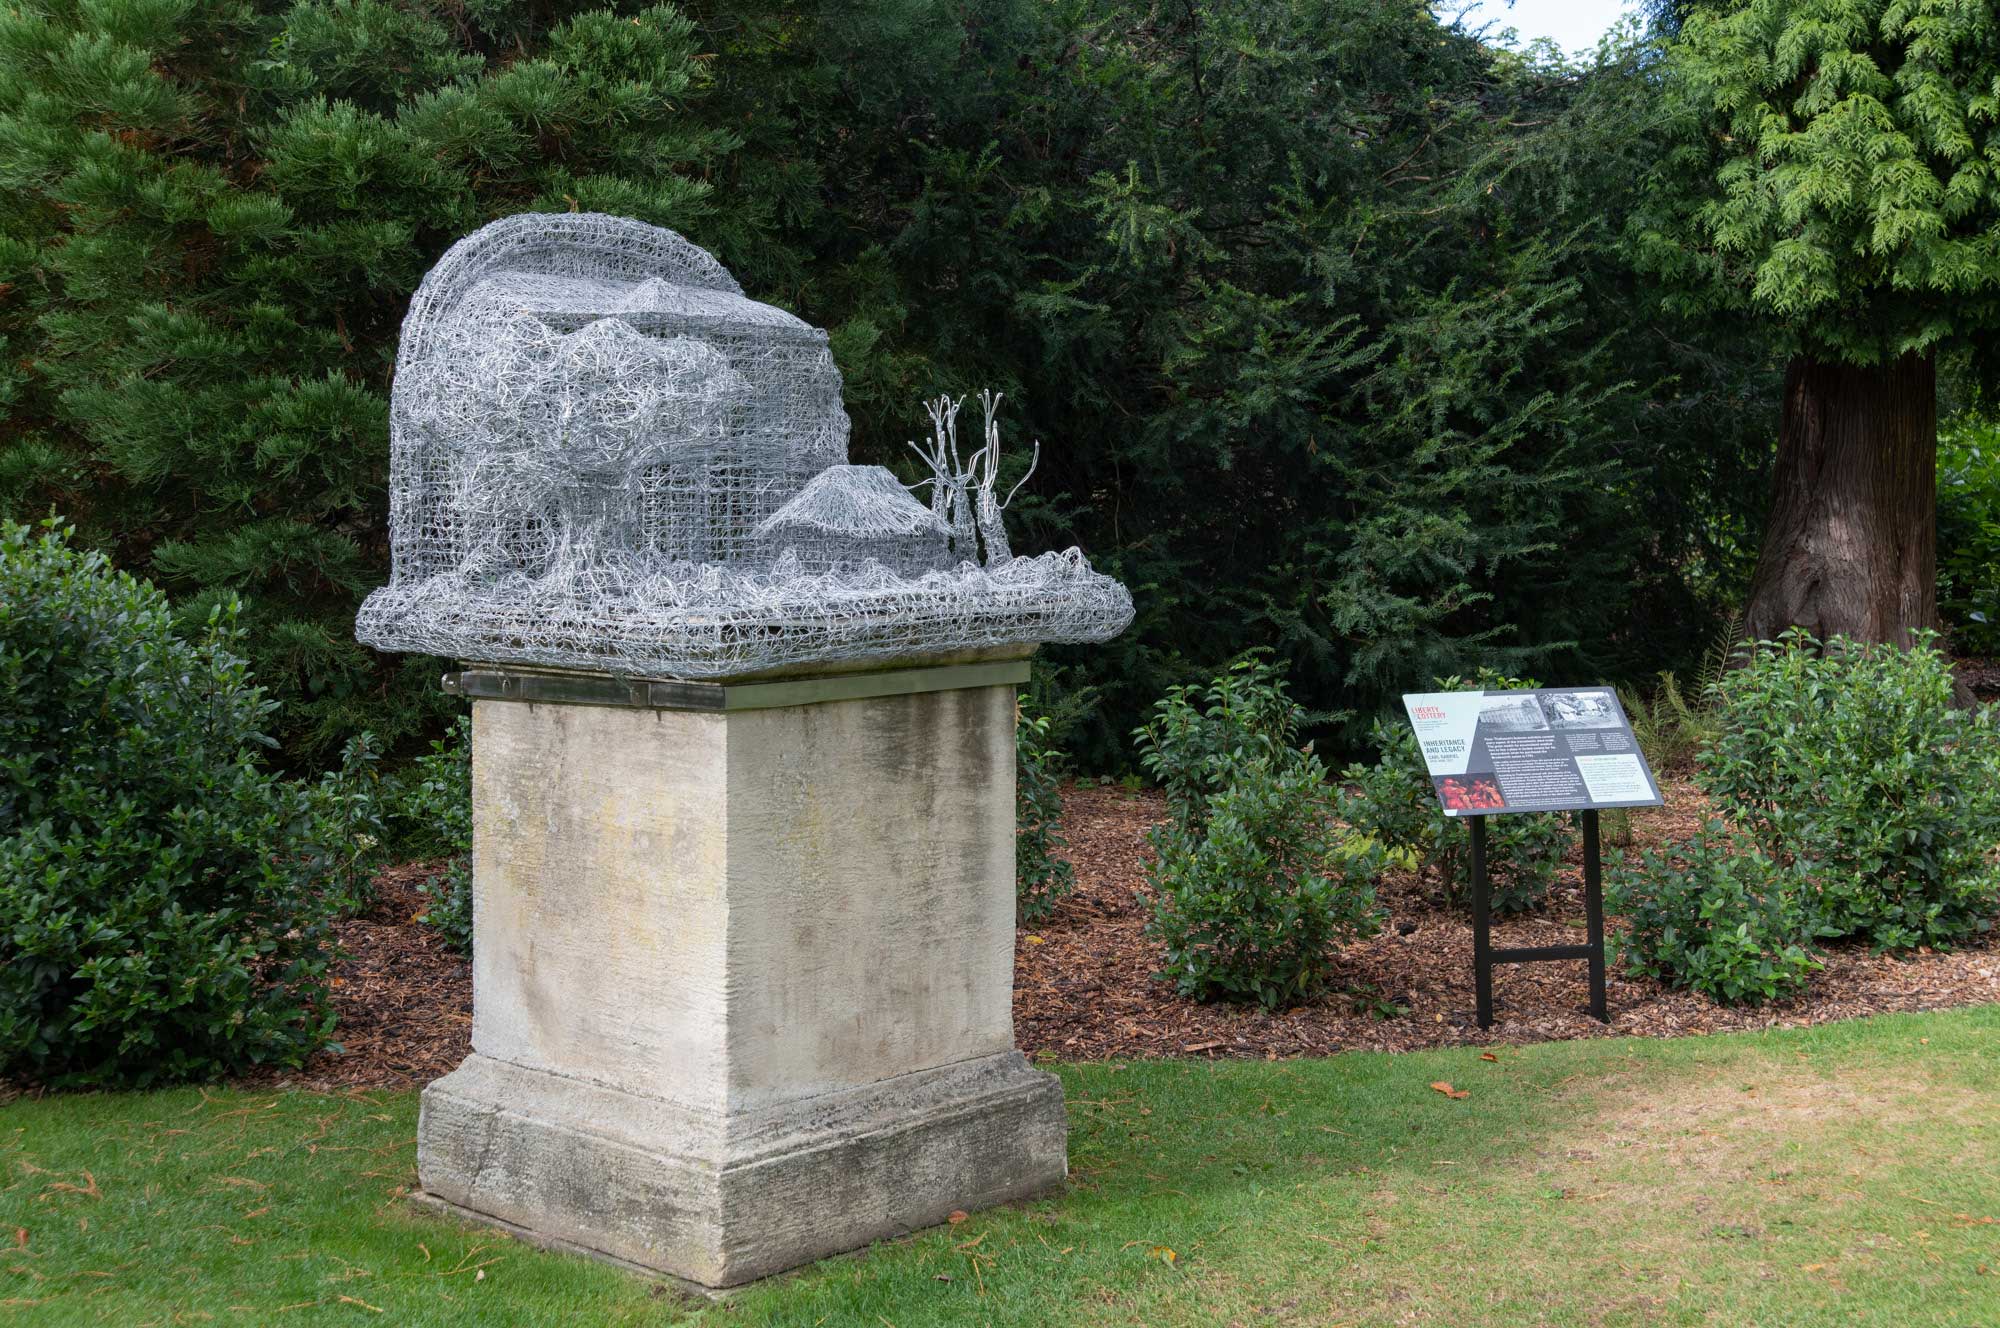 An installation comprising a wire sculpture of plantation structures, set on an existing stone plinth in a country house garden.